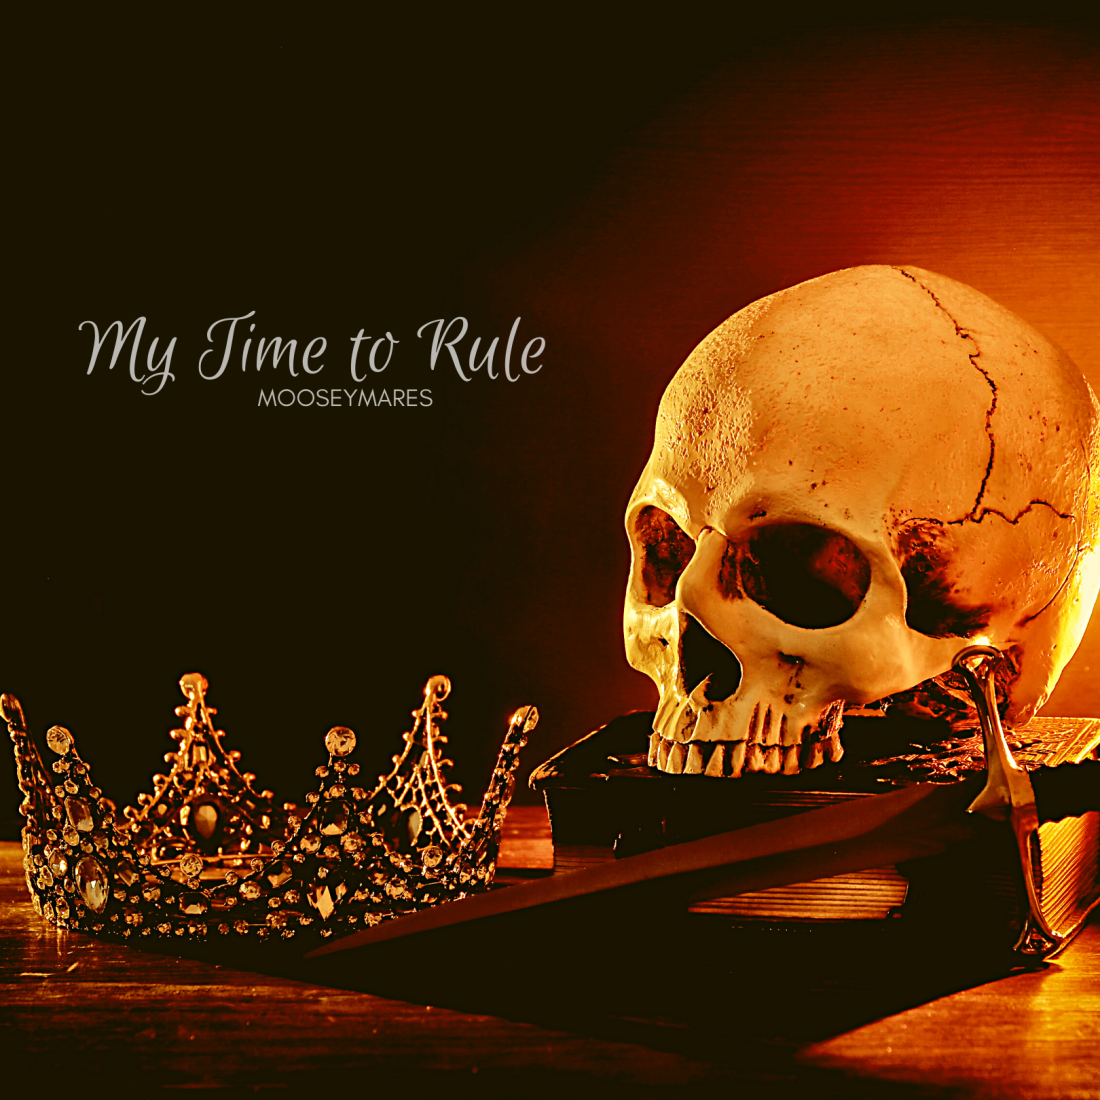 My Time To Rule | Poetry on Mooseymares